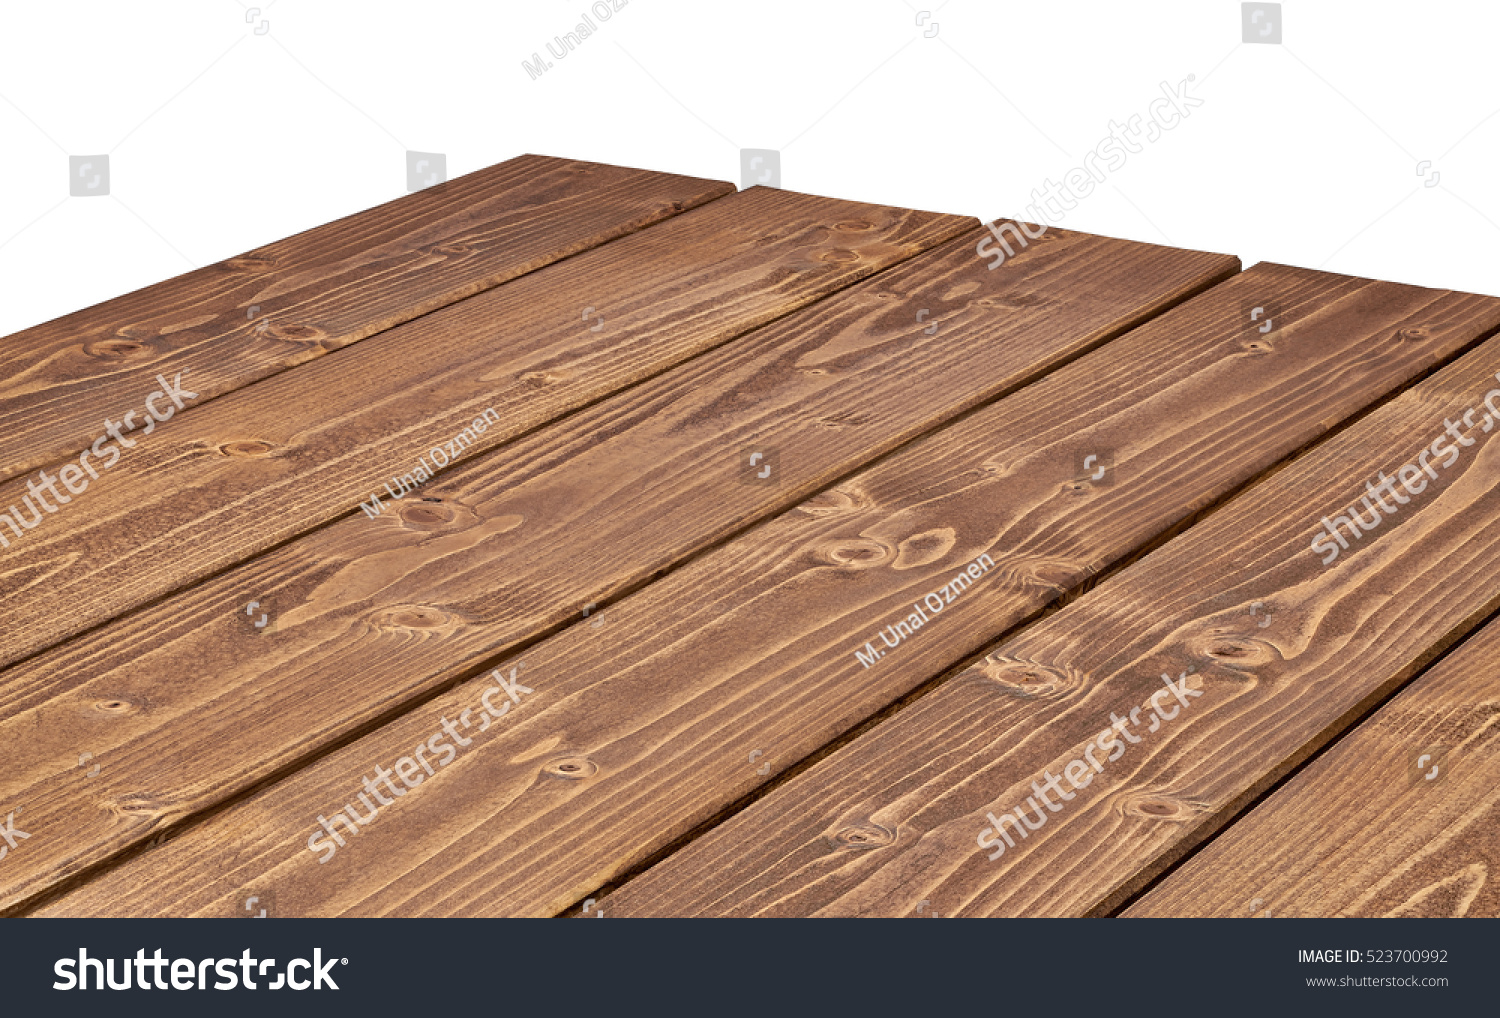 Perspective view of wood or wooden table corner on white background including clipping path
 #523700992